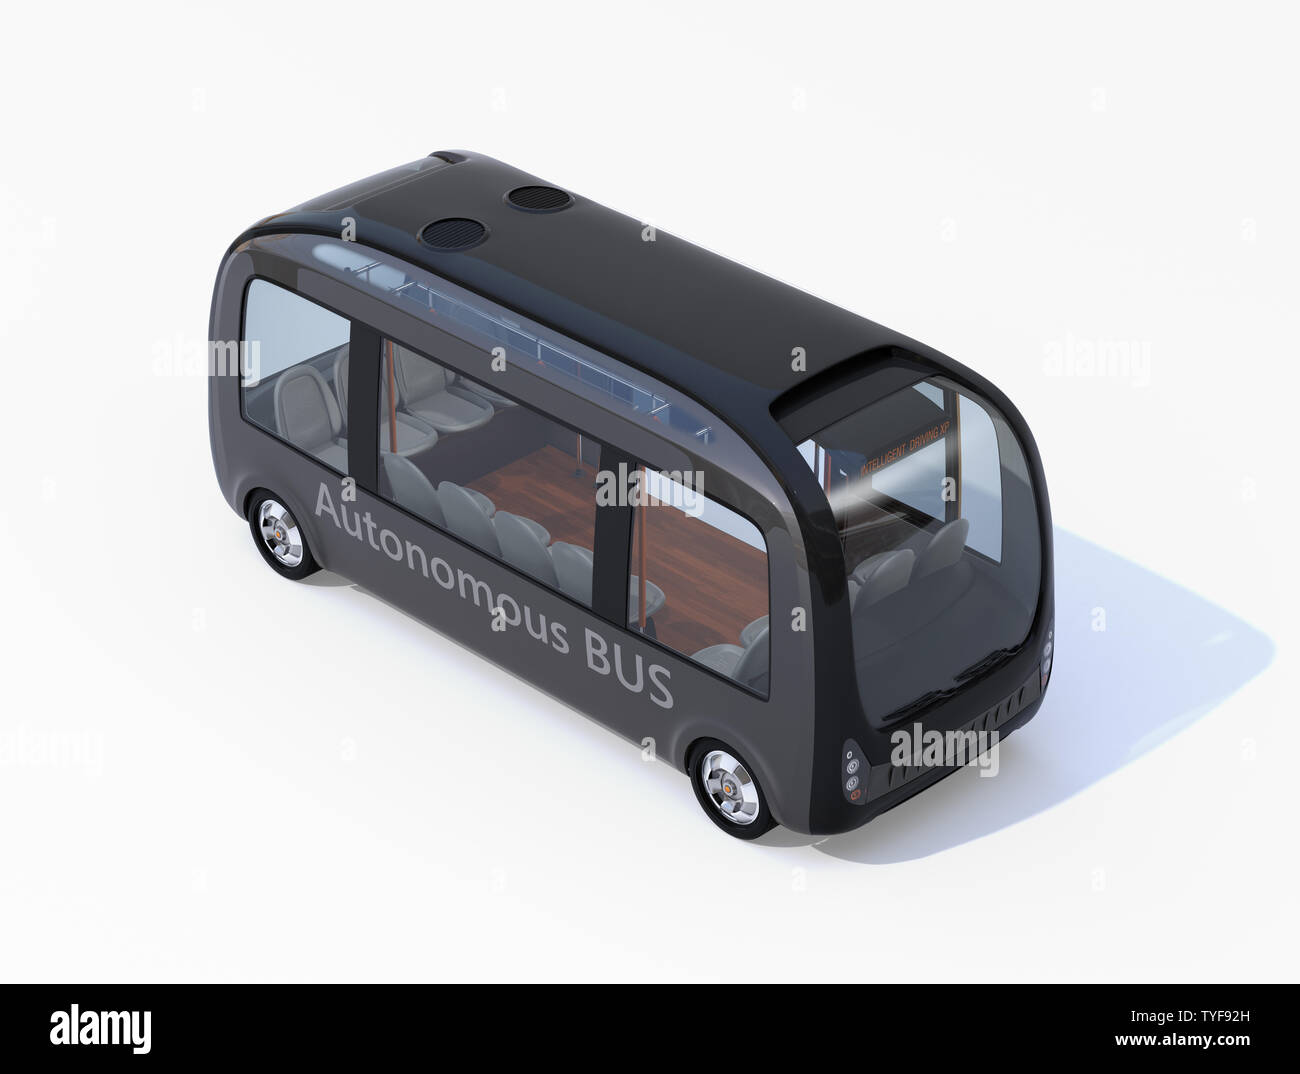 Self-driving shuttle bus isolated on white background. 3D rendering image. Stock Photo